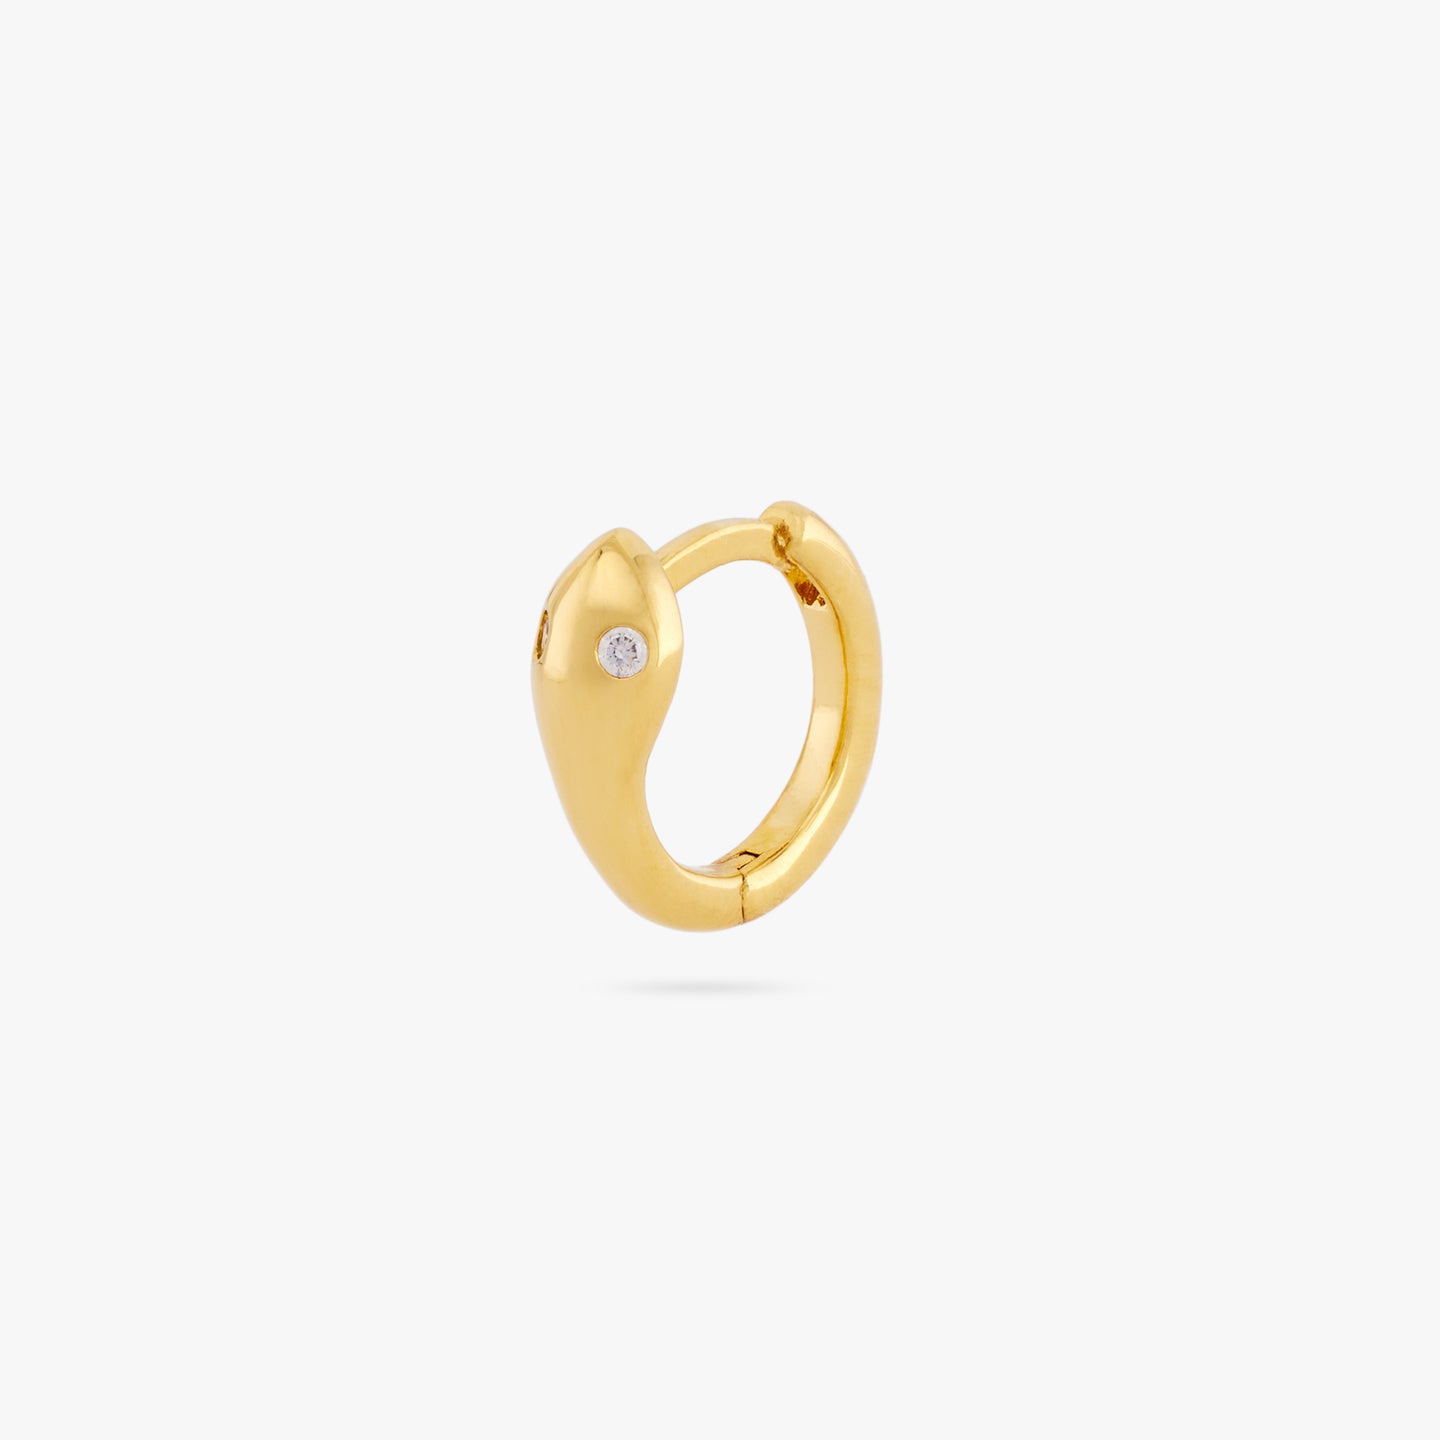 This is a gold serpent shaped huggie earring with a clear CZ eye color:null|gold